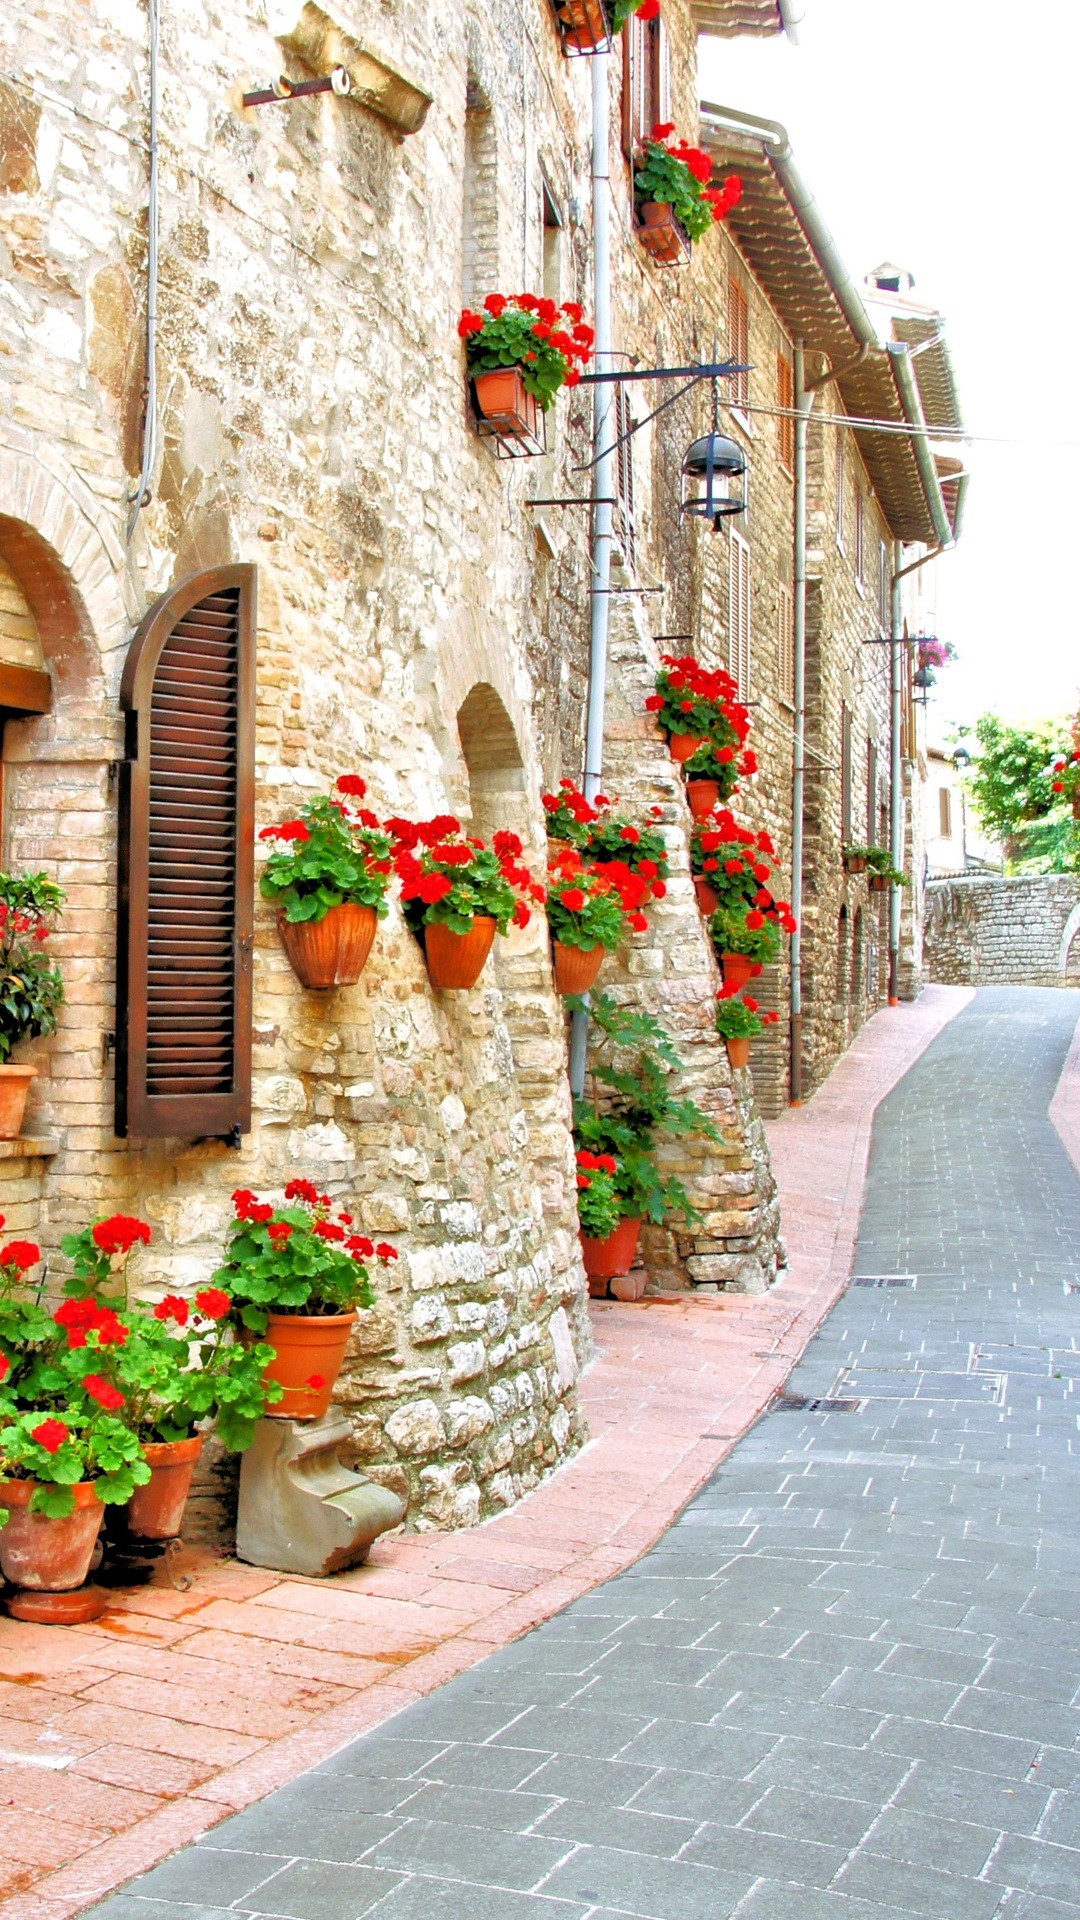 Beautiful residential area of Italy